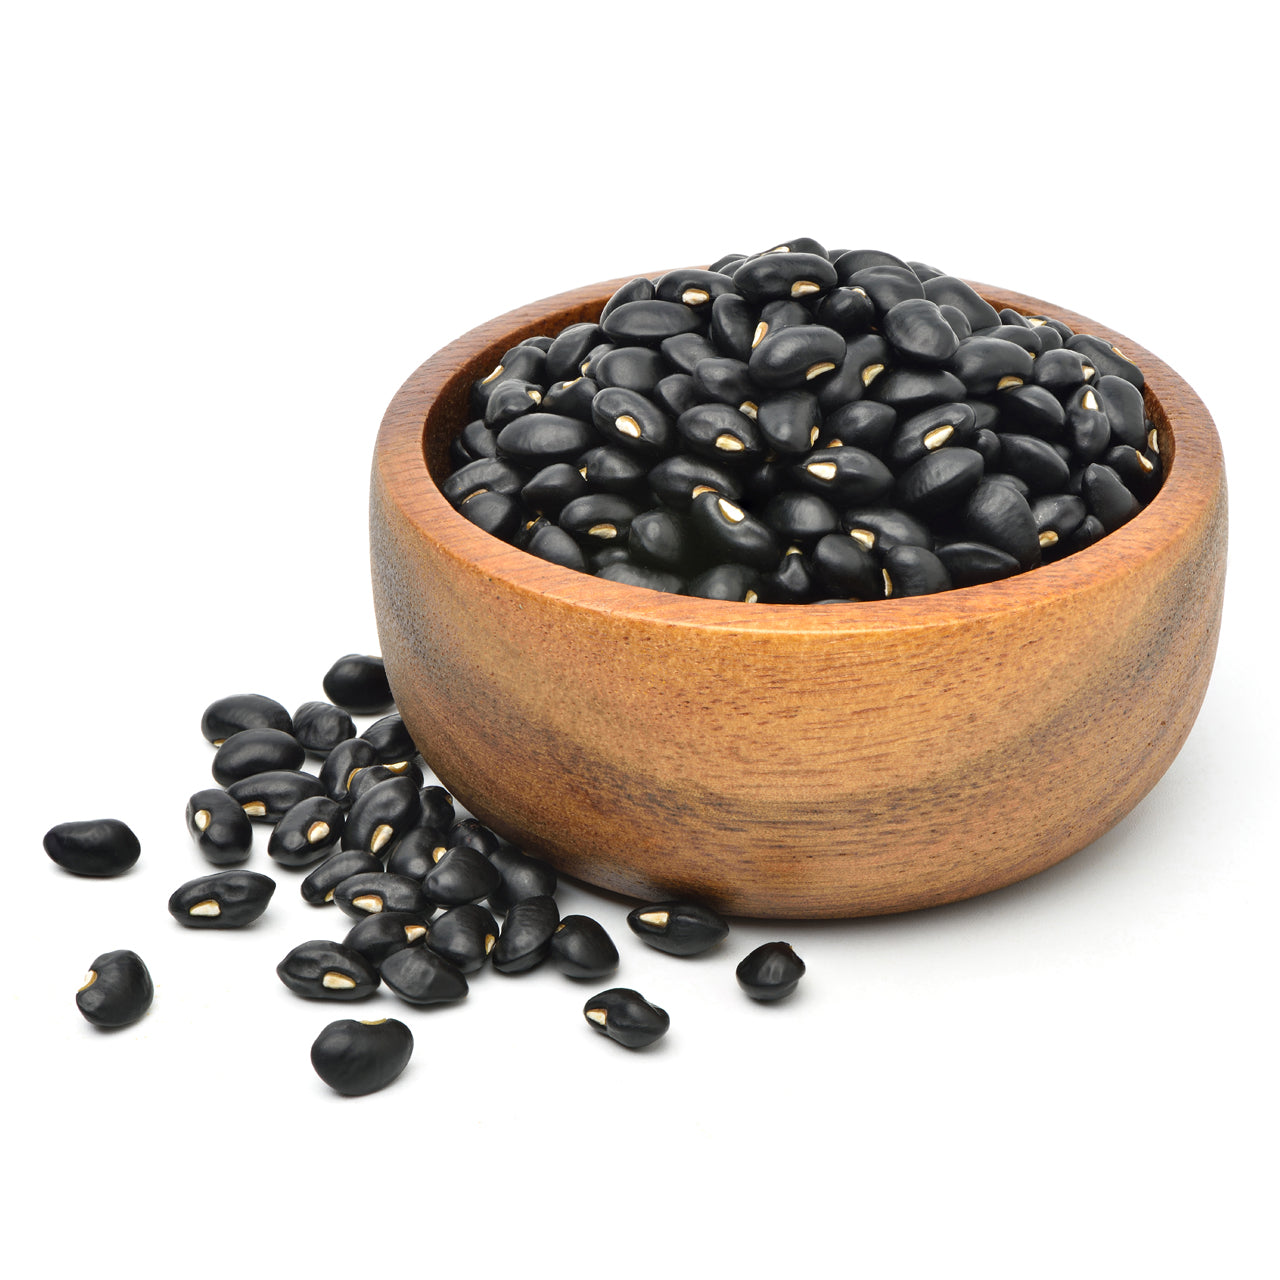 [Talking about Food 1] Anti-aging health food & recipe: Black beans